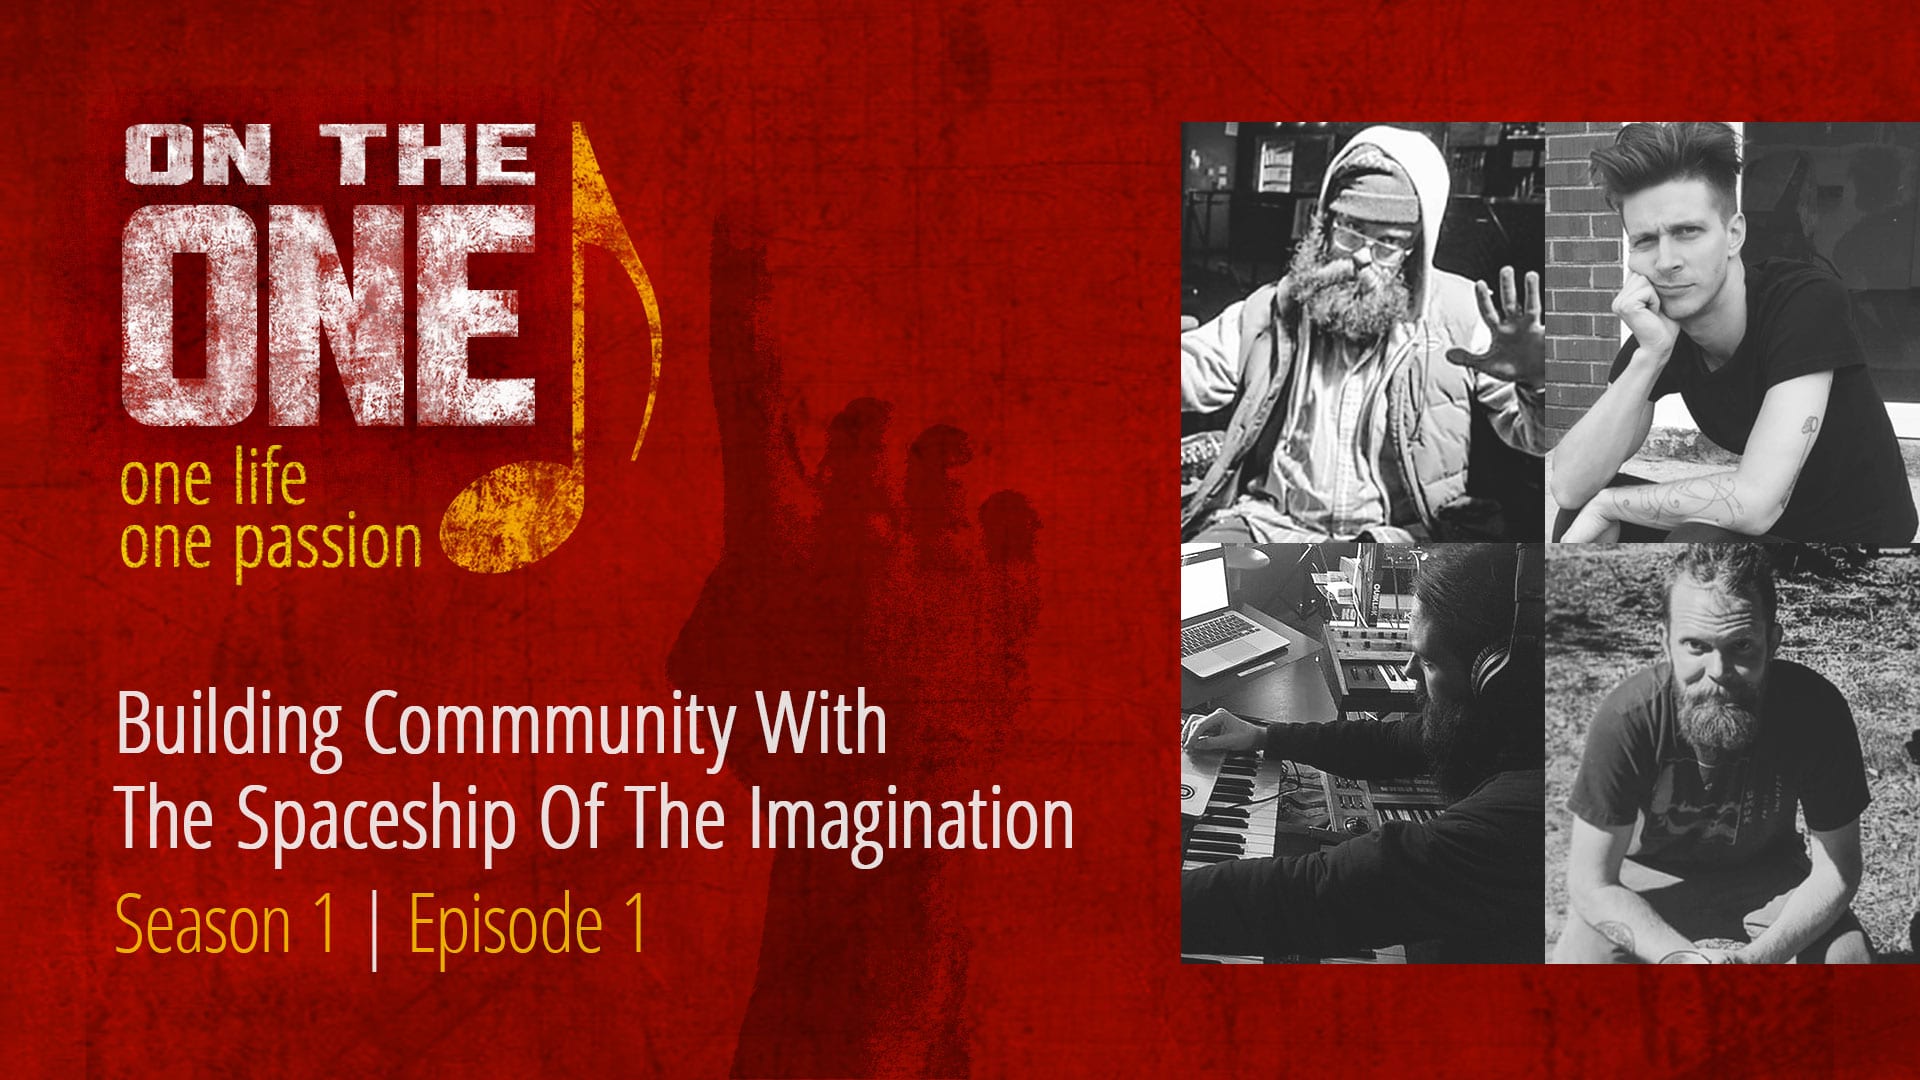 On The One Podcast: The Spaceship Of The Imagination